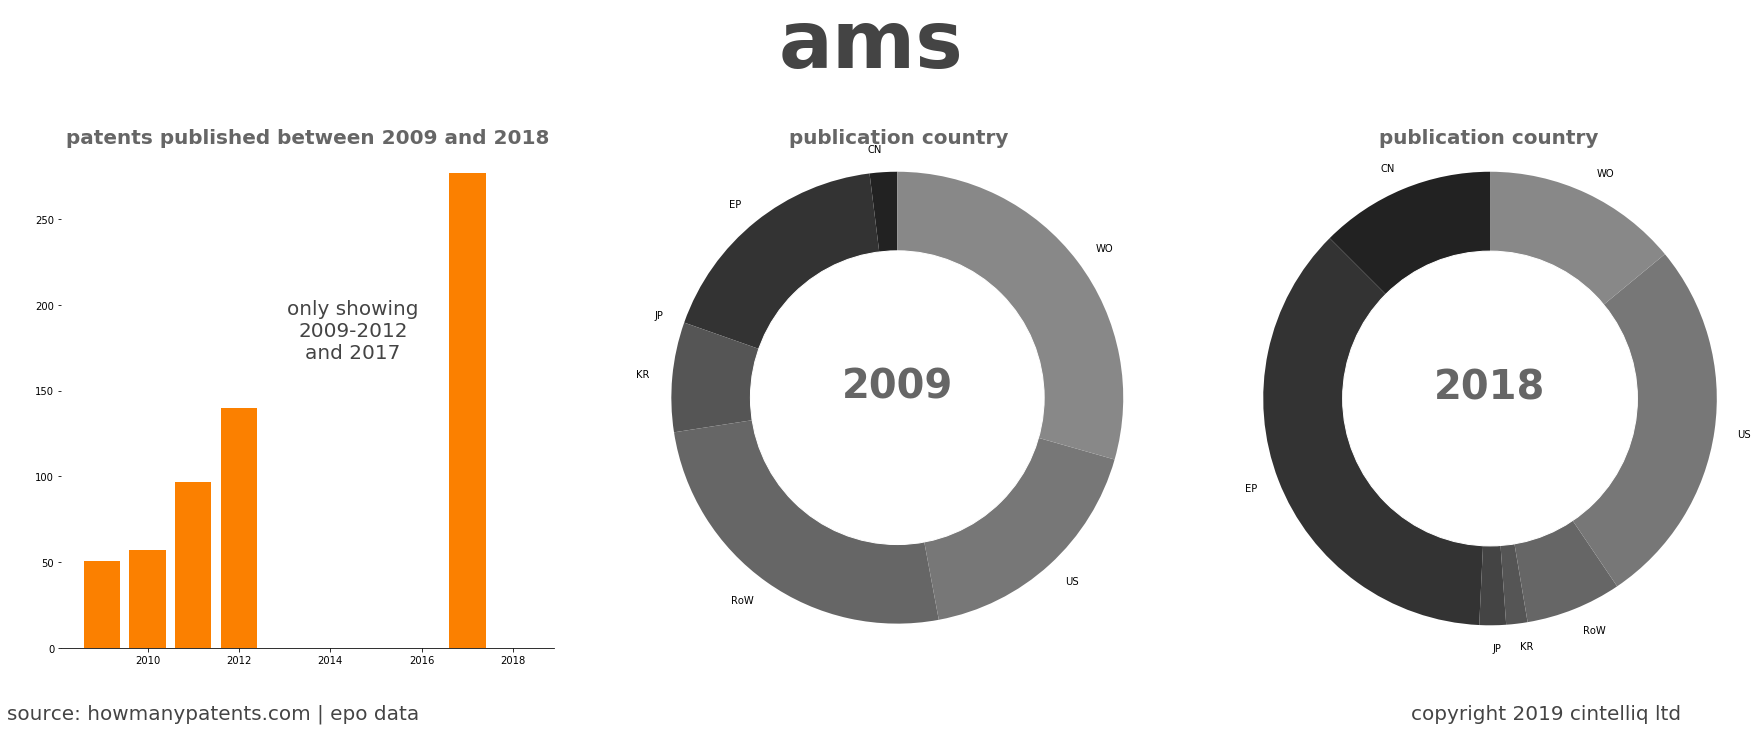 summary of patents for Ams